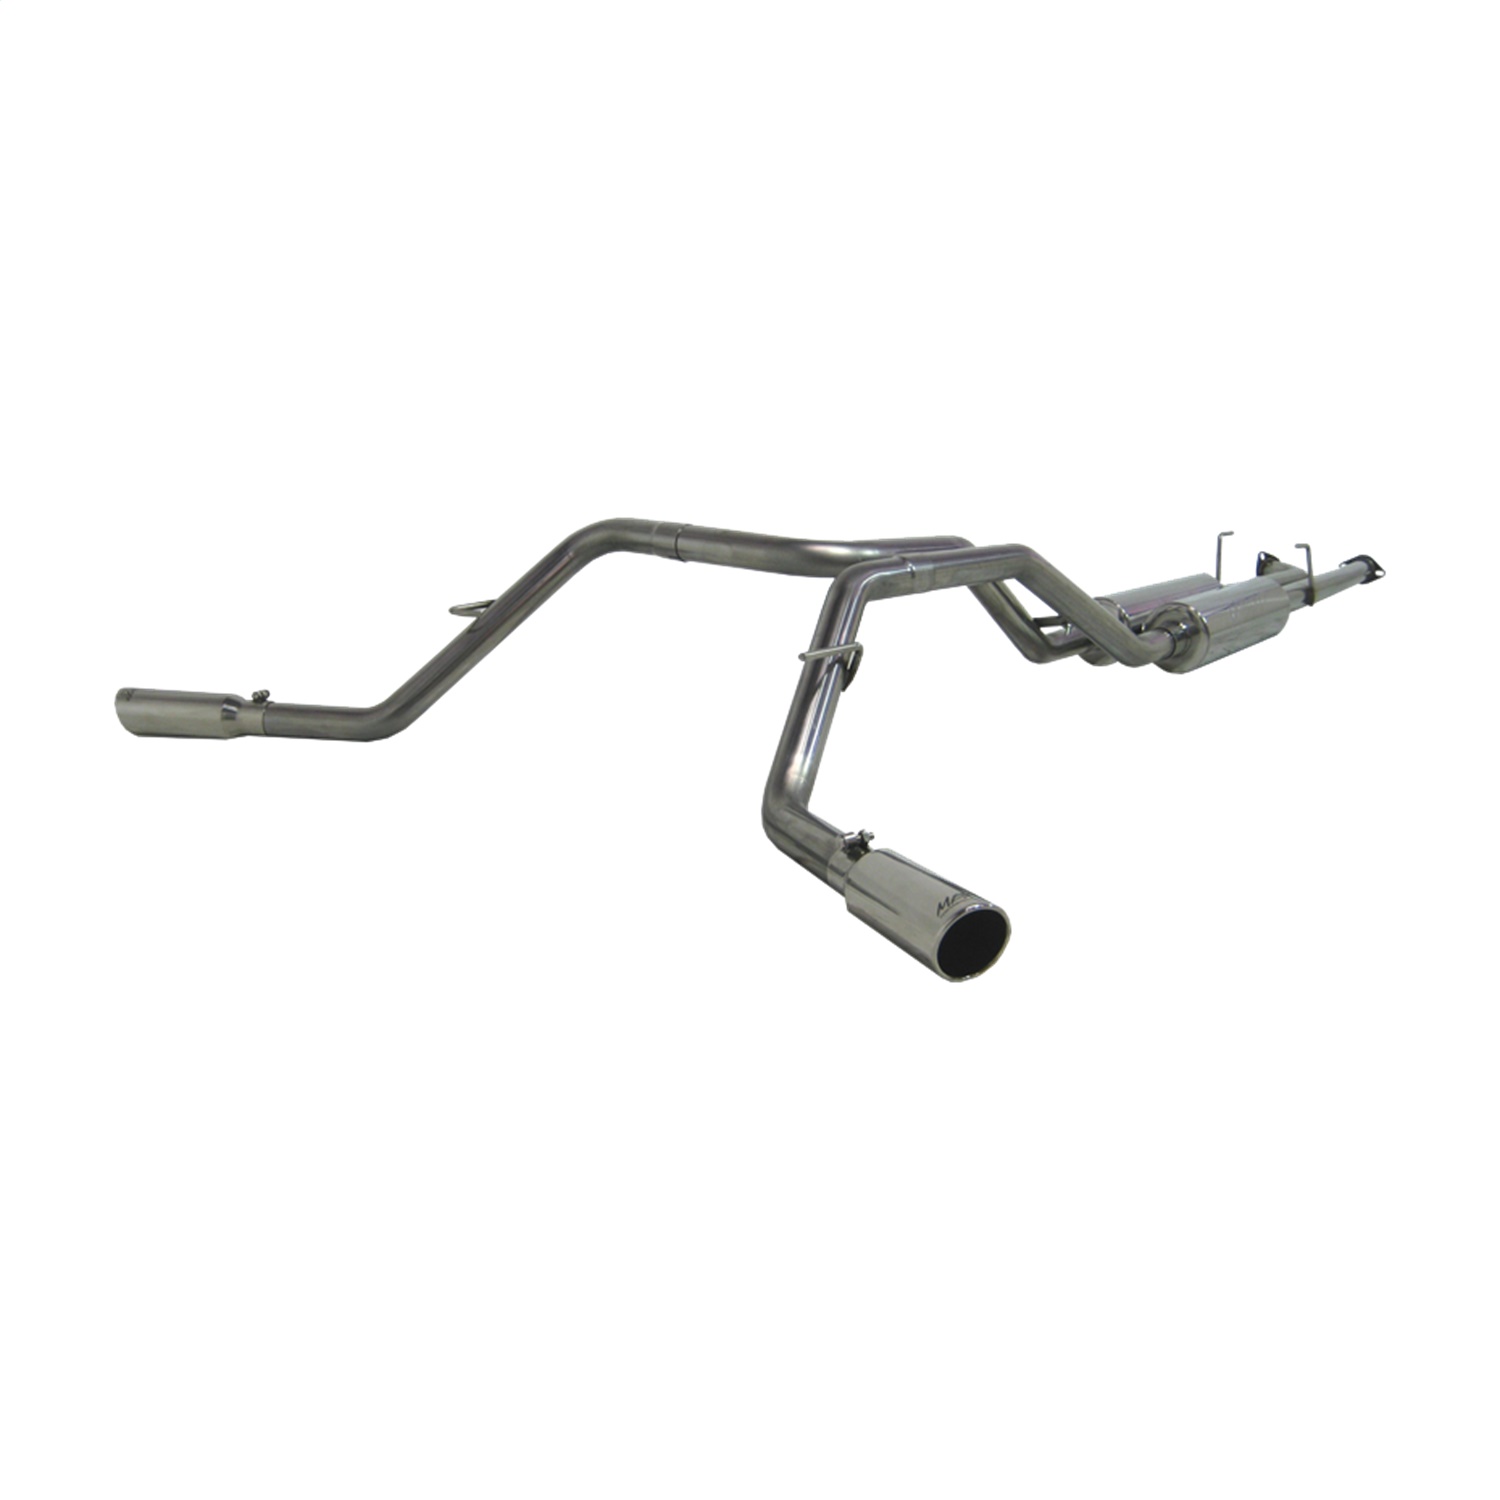 MBRP Exhaust S5306409 Armor Plus Cat Back Exhaust System Fits 07-09 Tundra